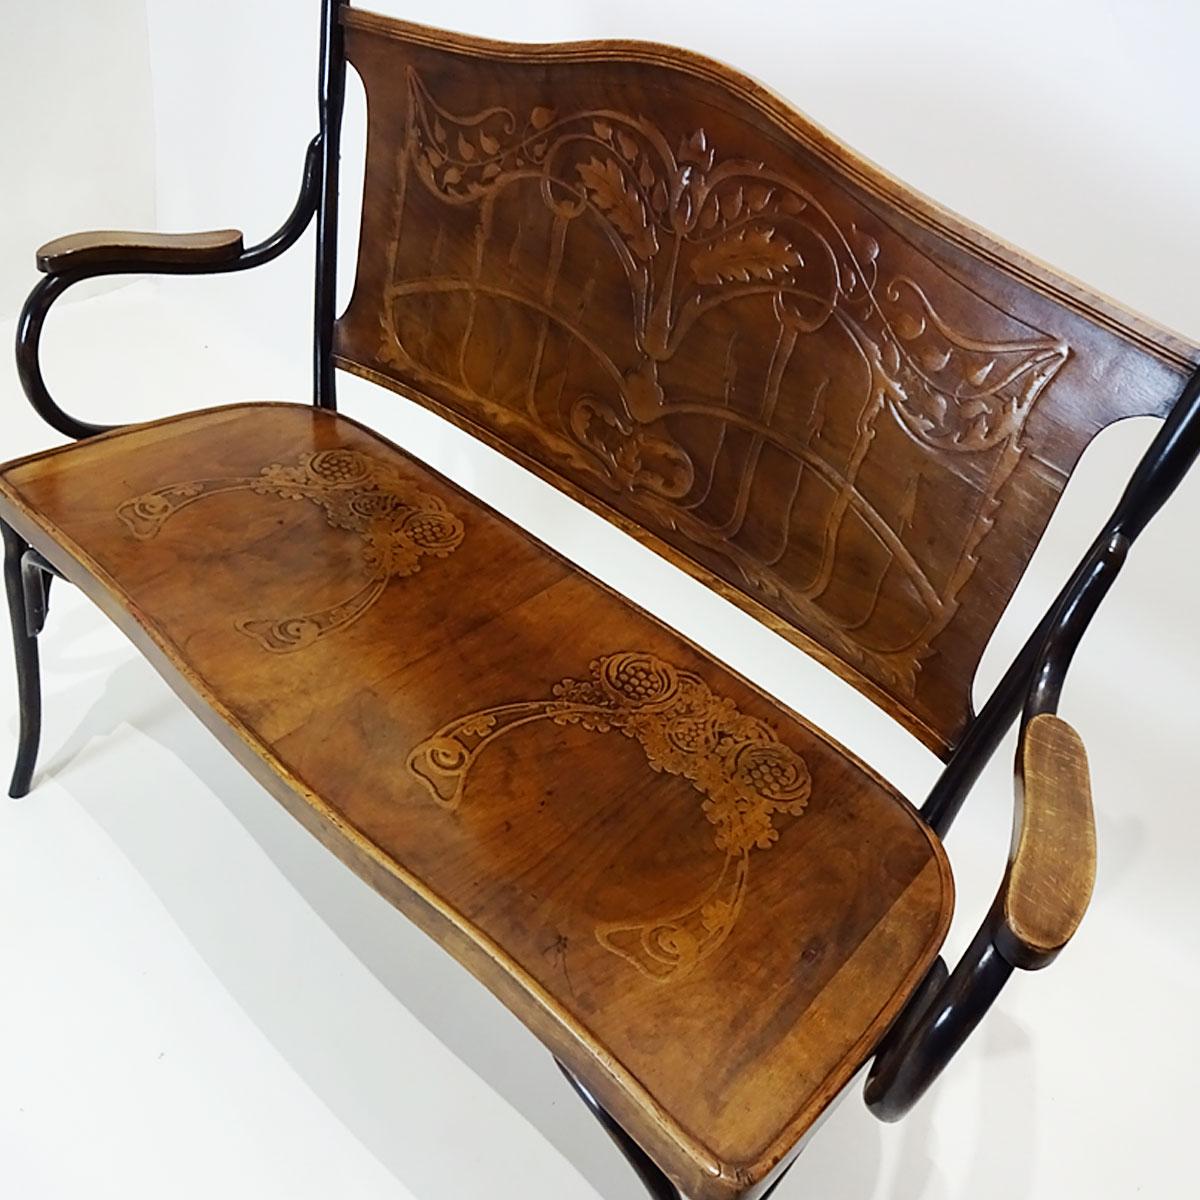 Austrian Antique Embossed Bentwood Bench Attributed to Jacob and Josef Kohn